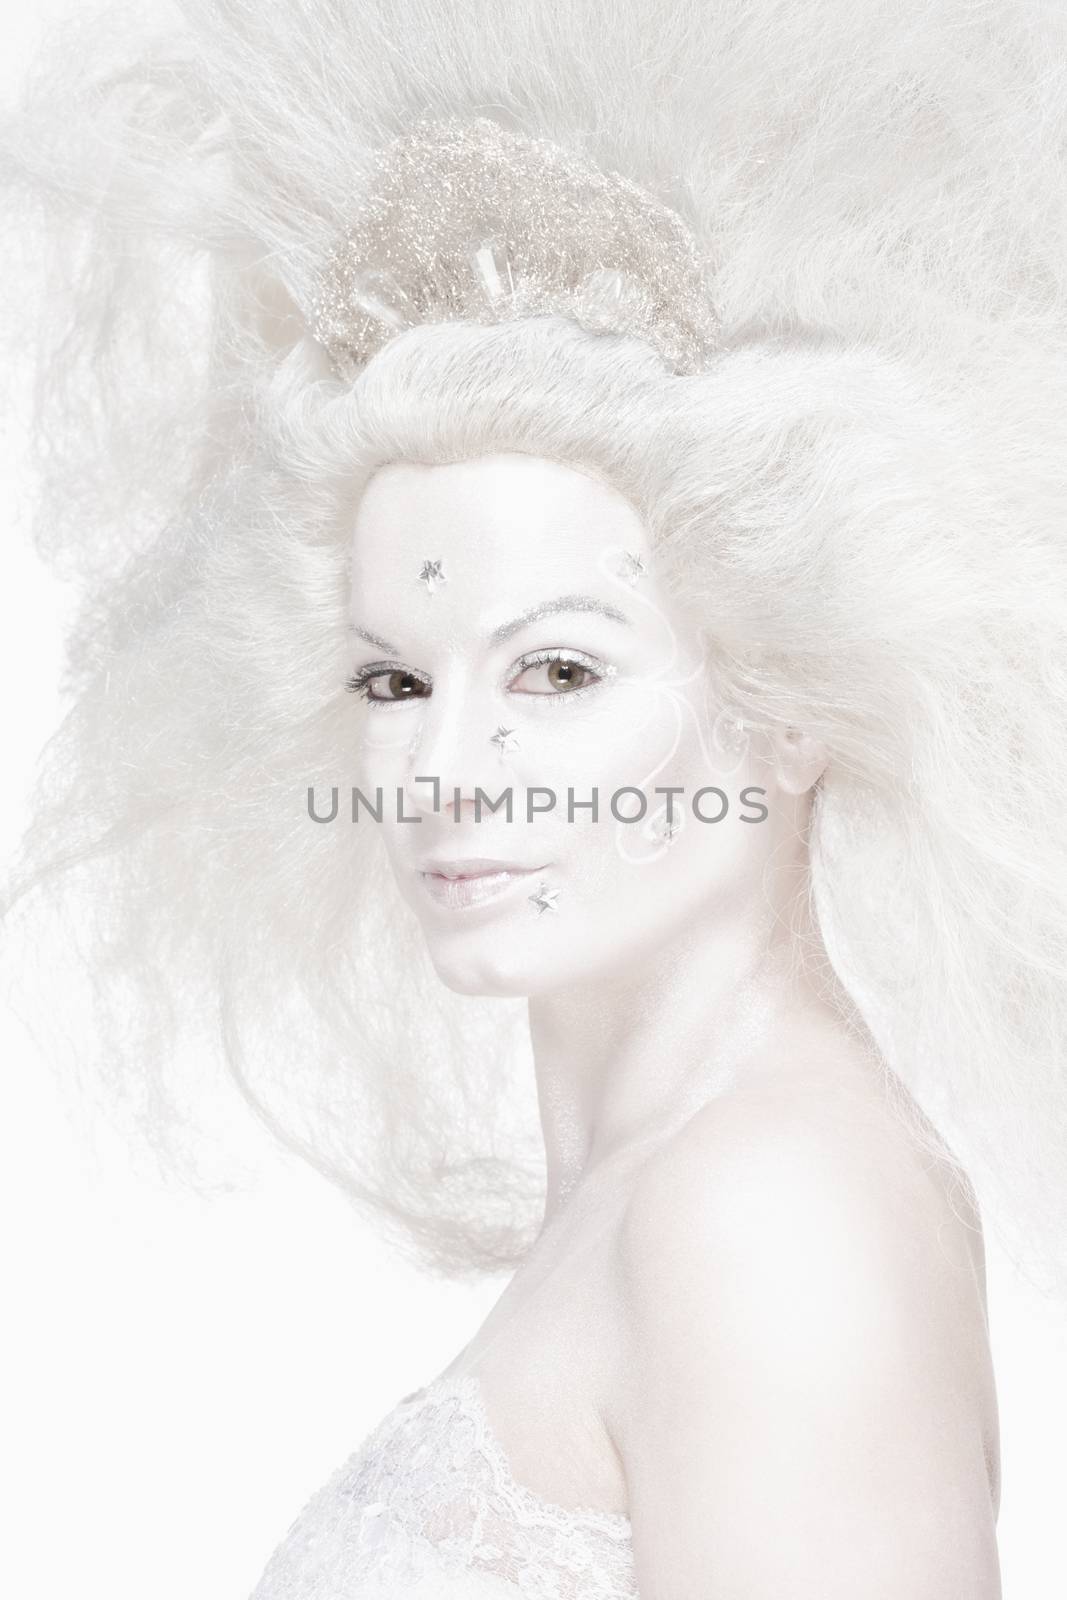 Woman with White Wig Posing as The Snow Queen by courtyardpix